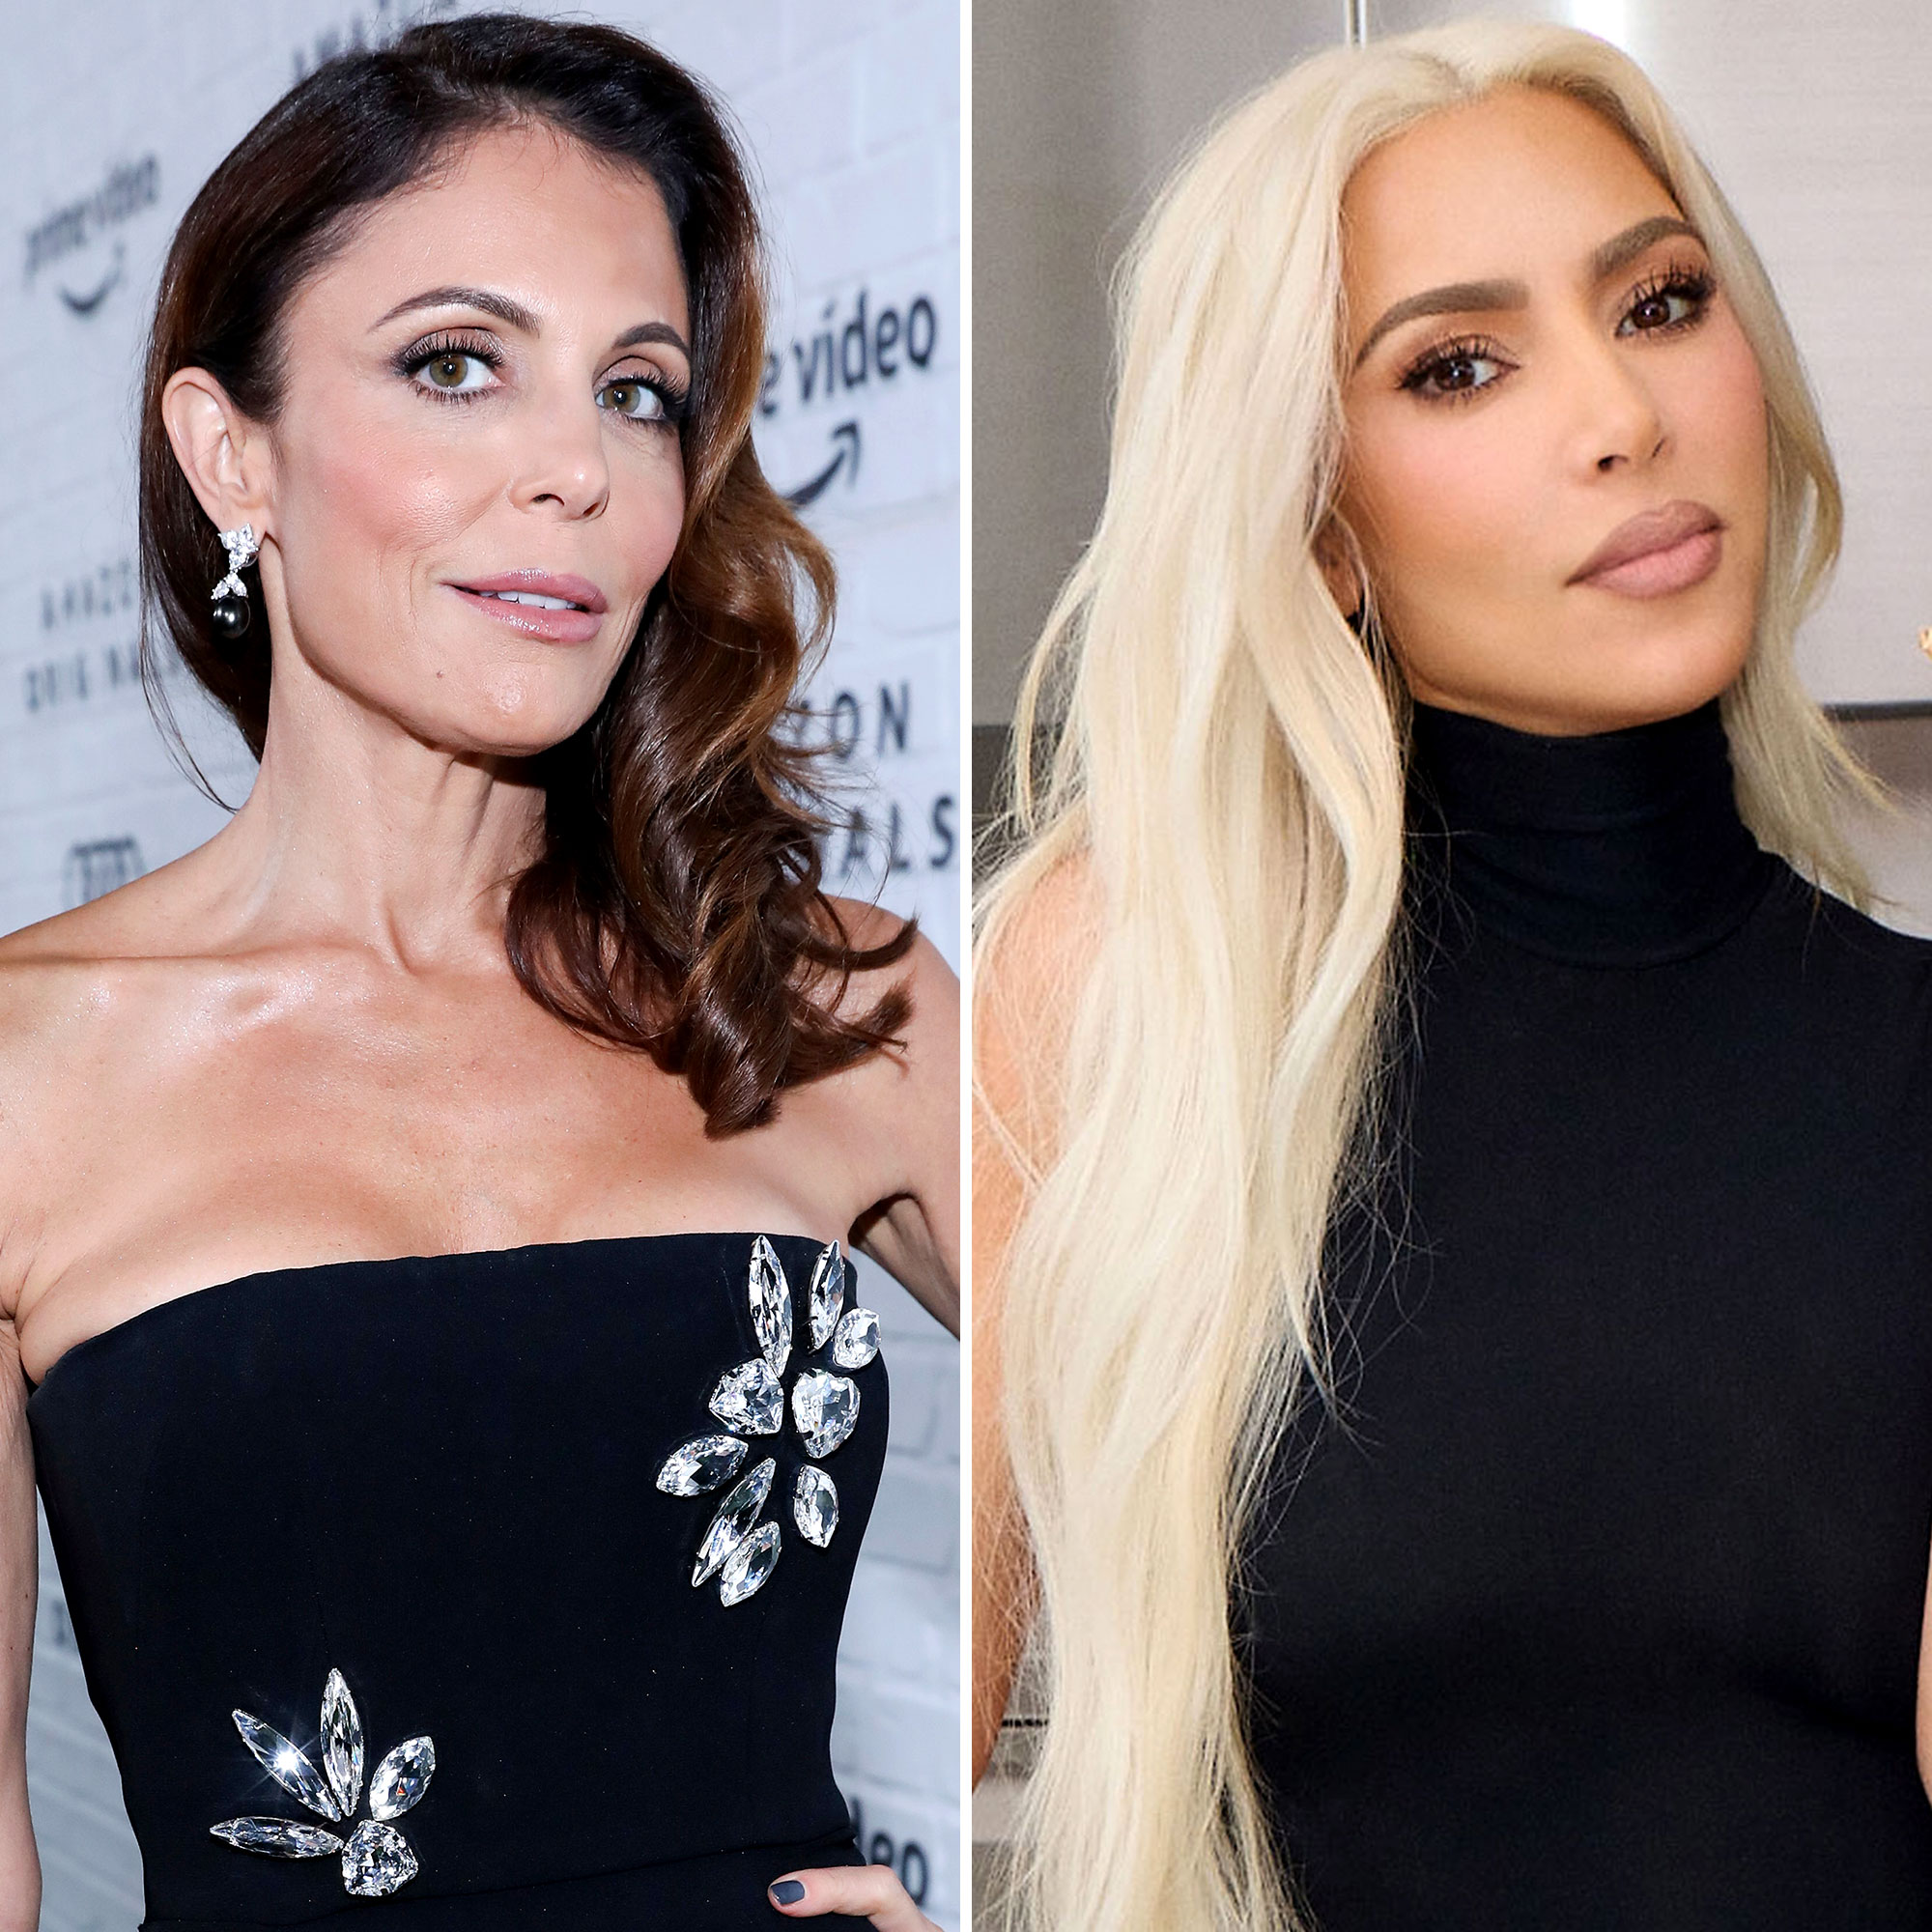 Bethenny Frankel Weighs In on Kim Kardashian Getting Booed picture